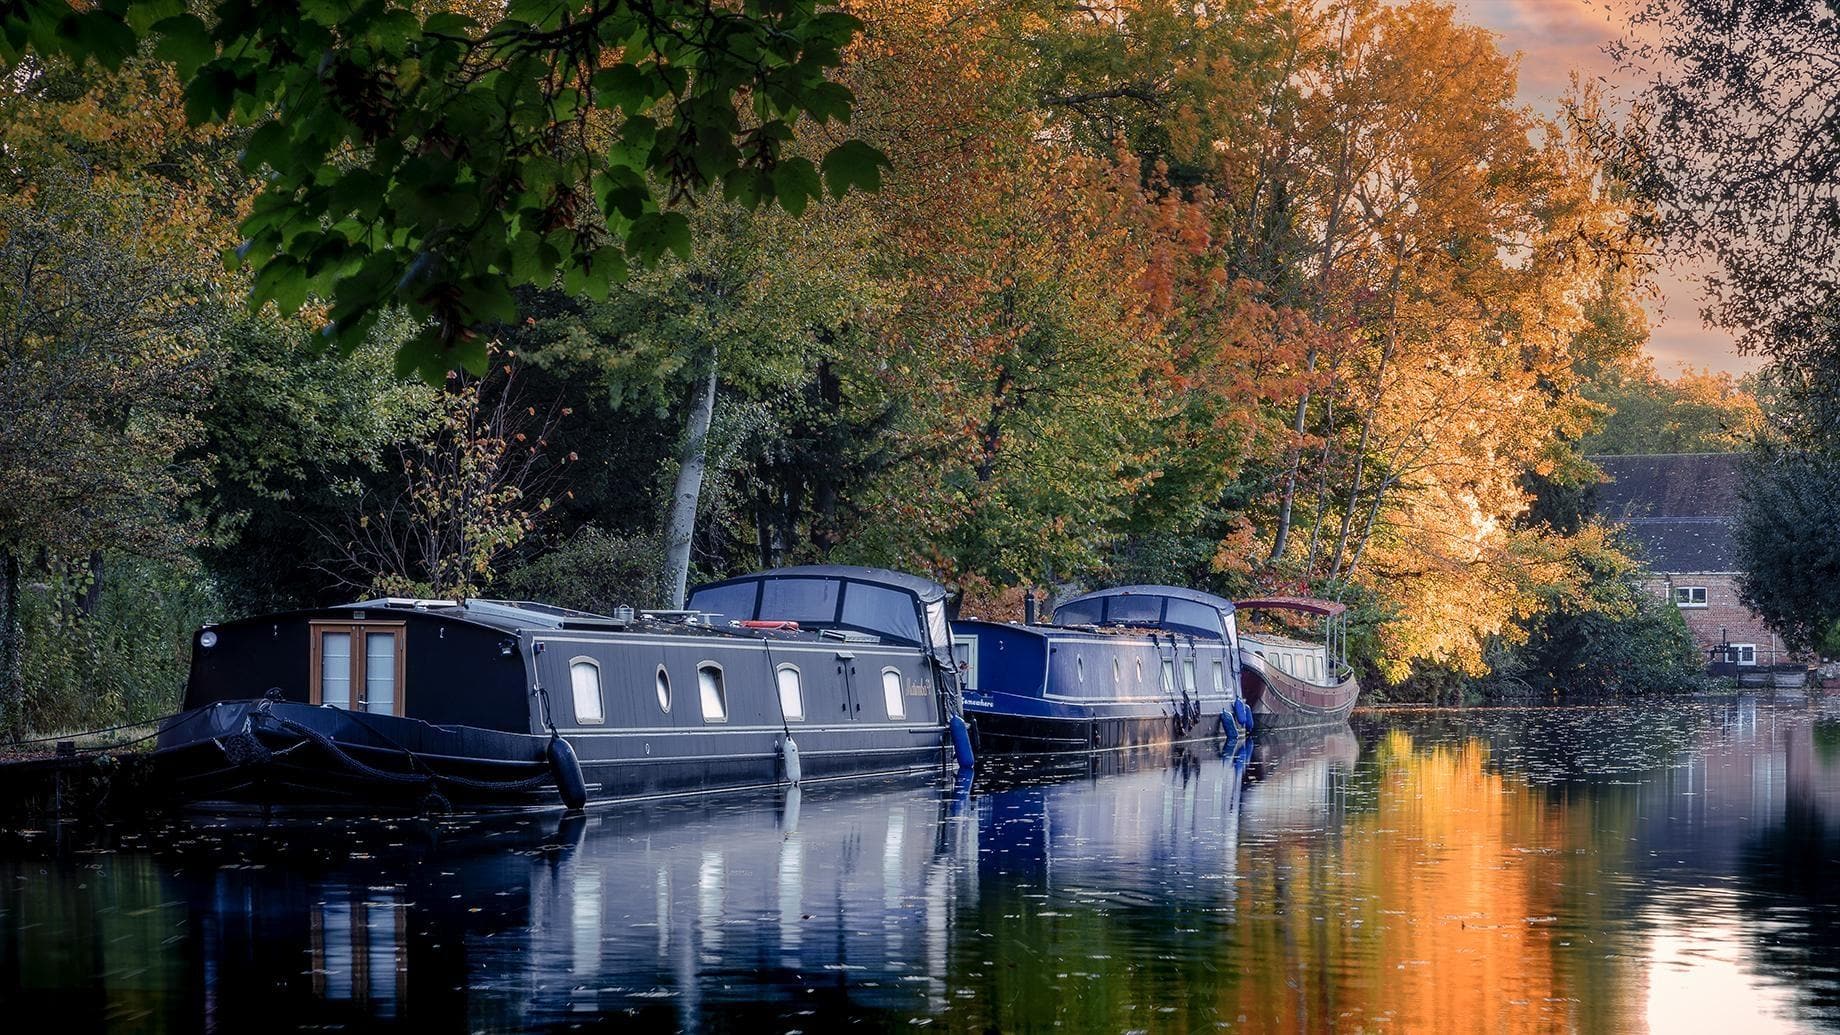 Narrow Boats on the Kennet and Avon Canal in Autumn.